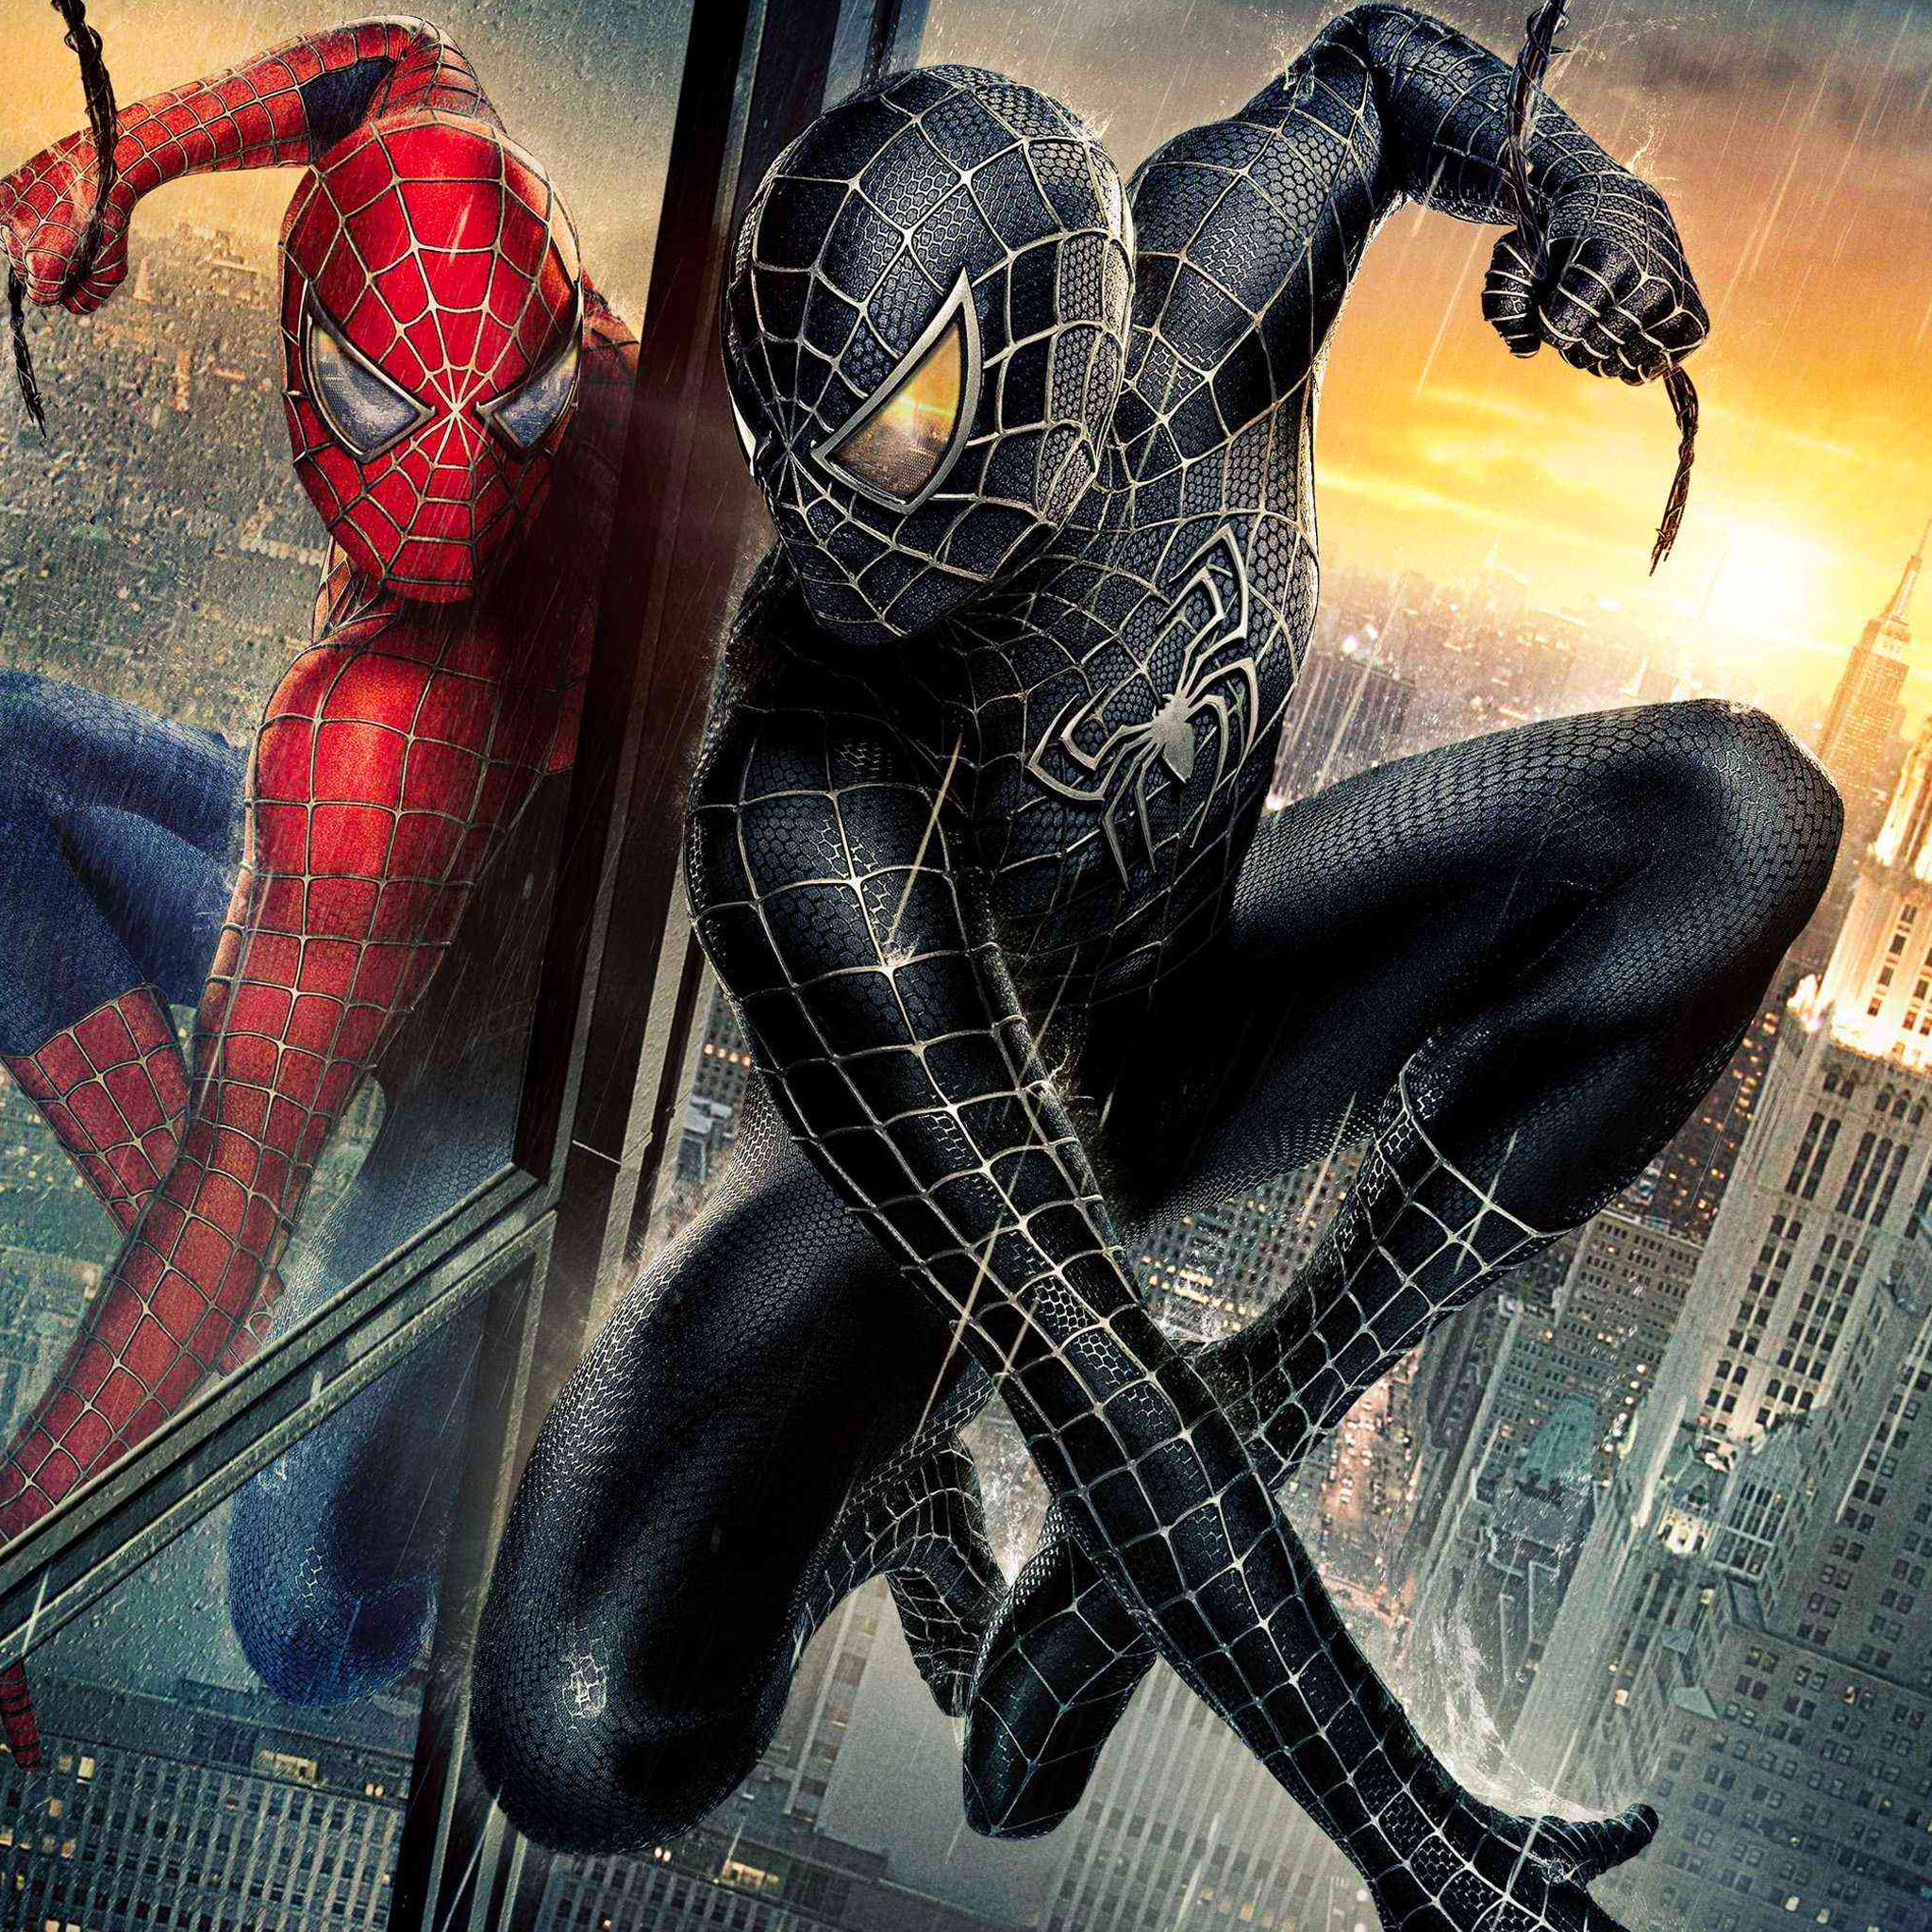 Spider Man 3 Wallpaper for iPhone Pro Max, X, 6